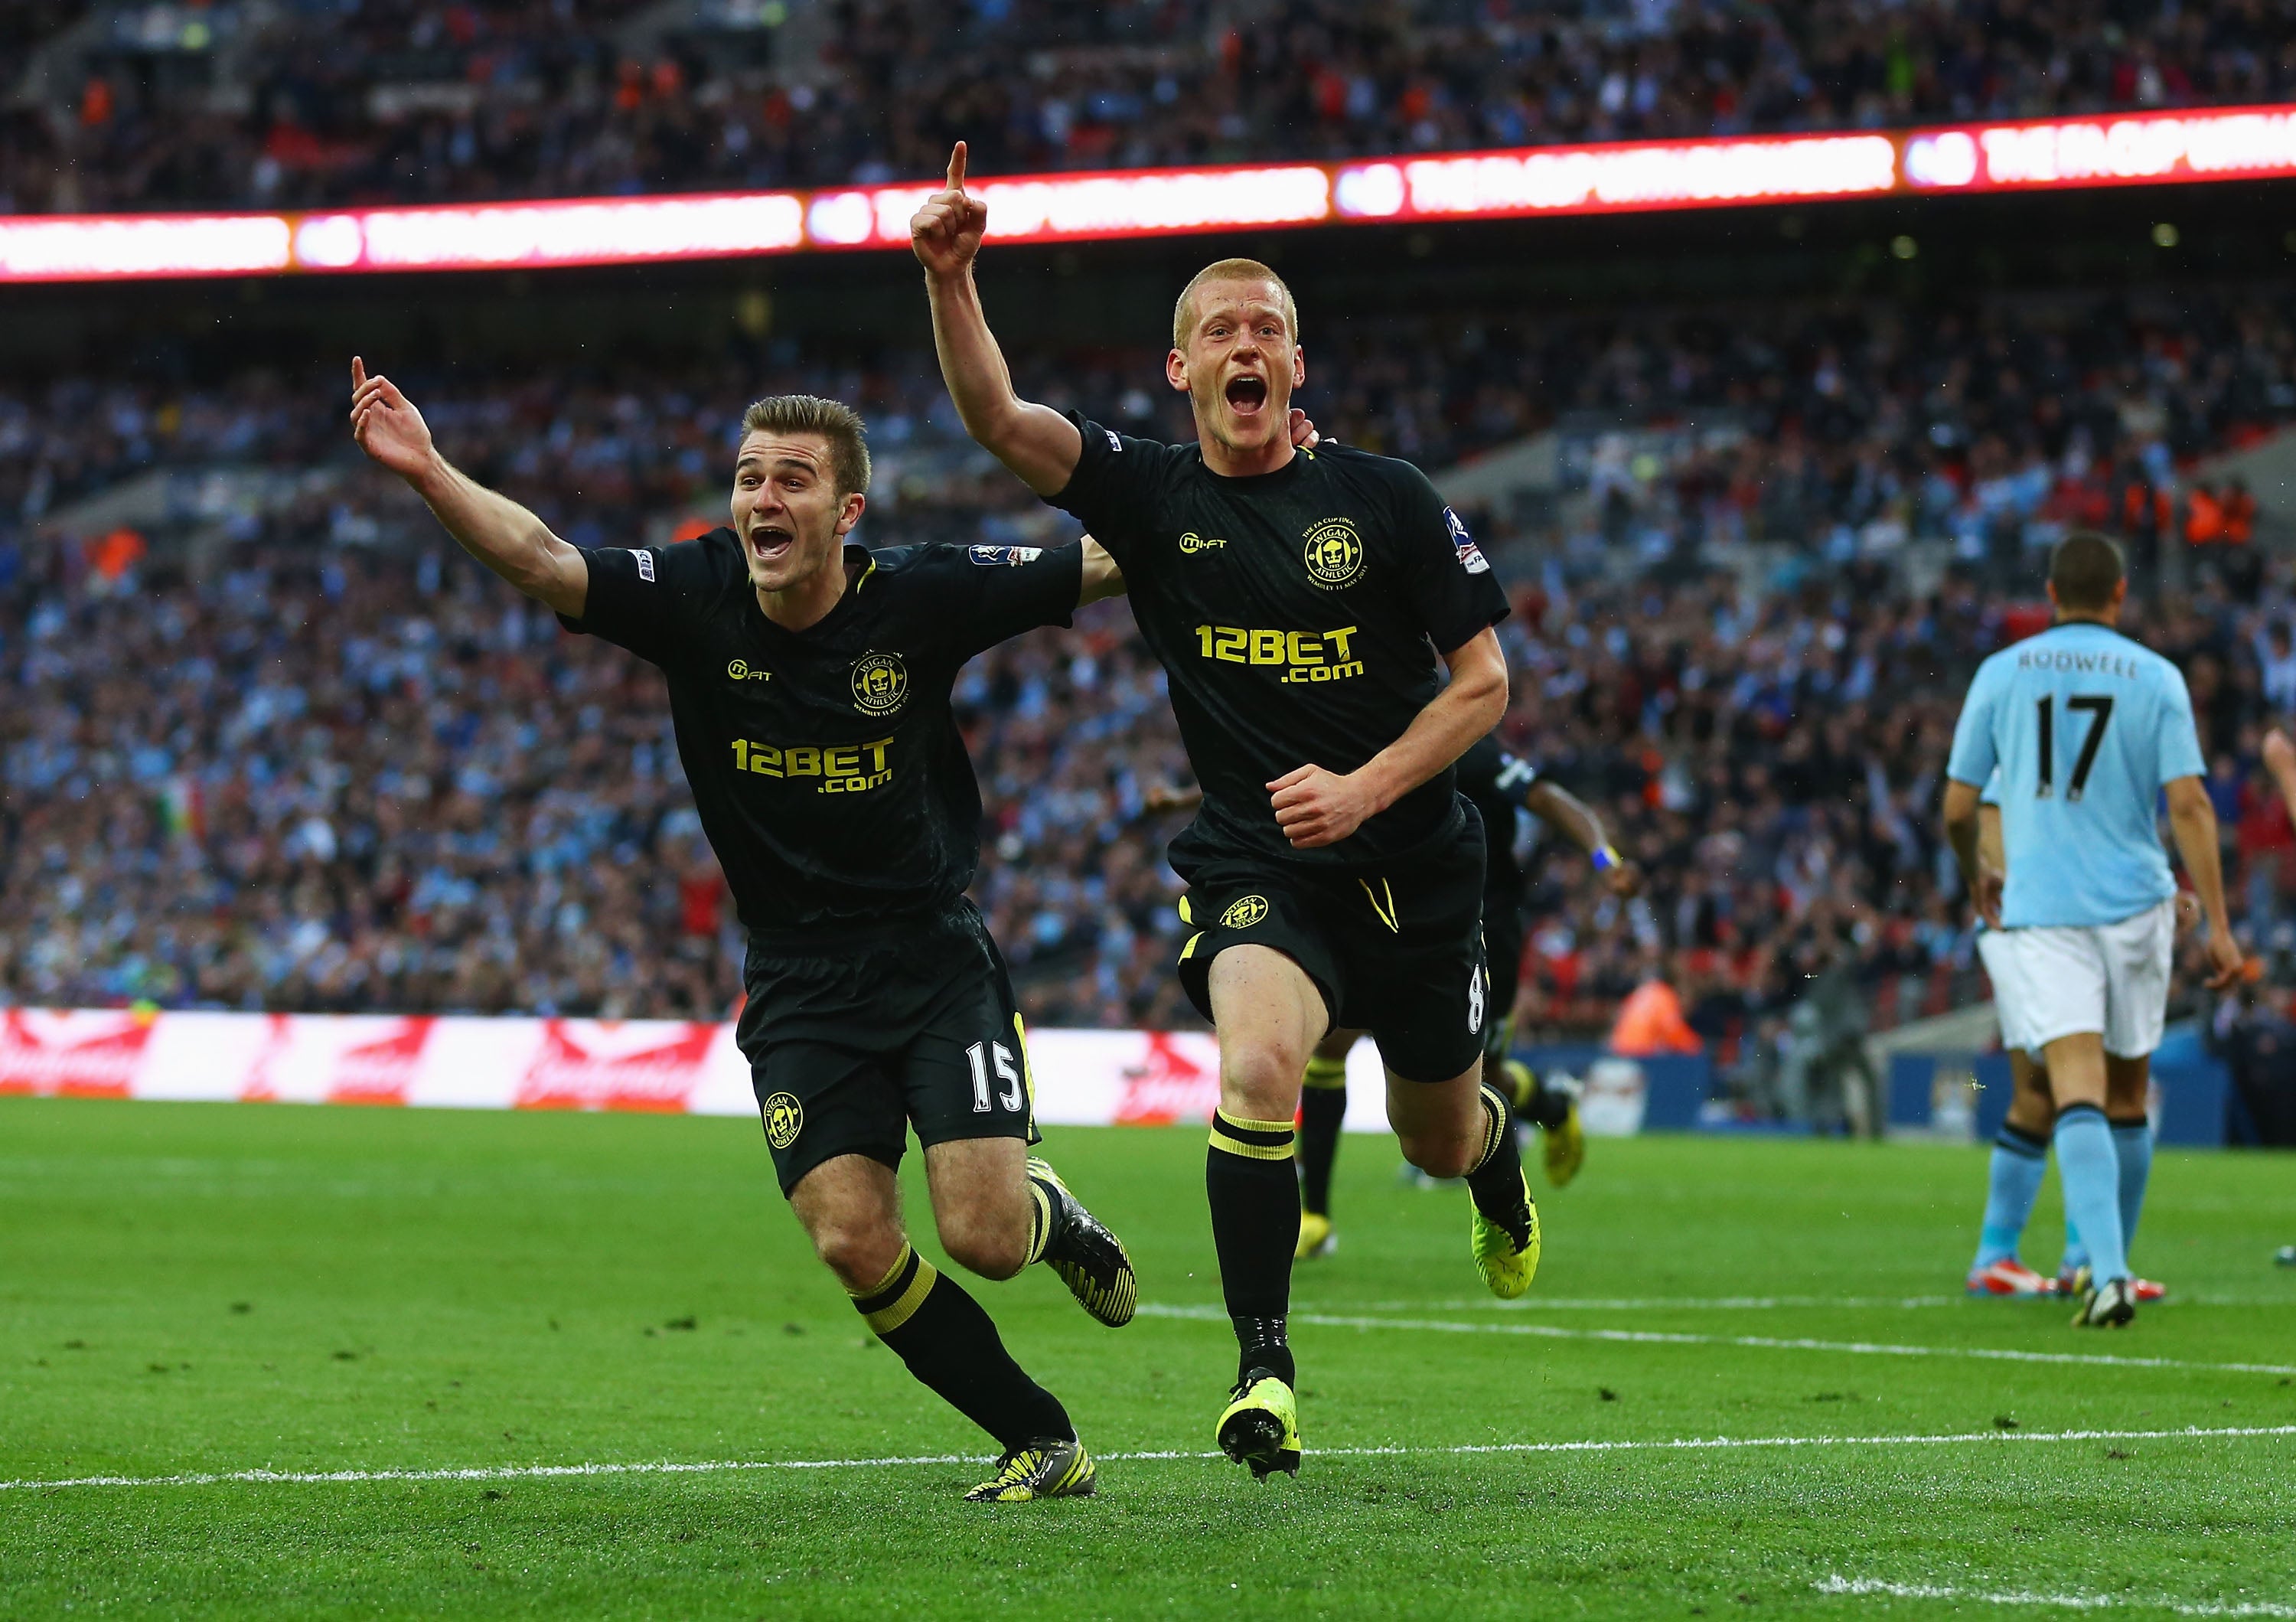 McManaman celebrates with Ben Watson, who scored the winning goal in Wigan’s 1-0 win at Wembley